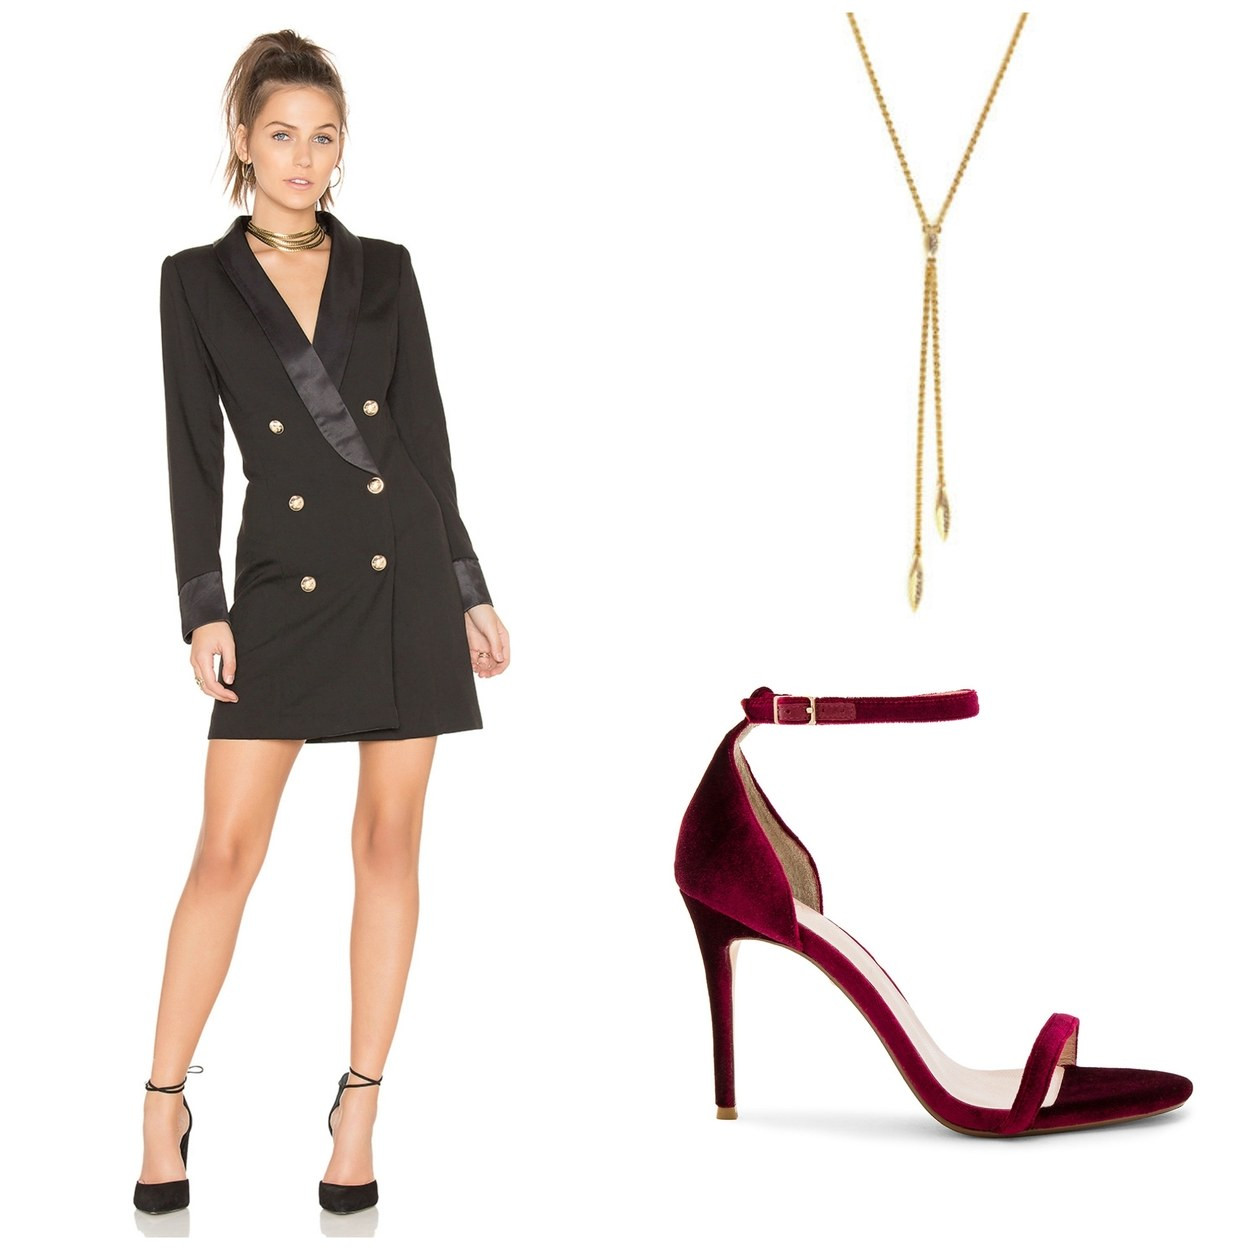 Office Holiday Party Outfit Ideas
 What Wear to an fice Holiday Party 10 Holiday Party